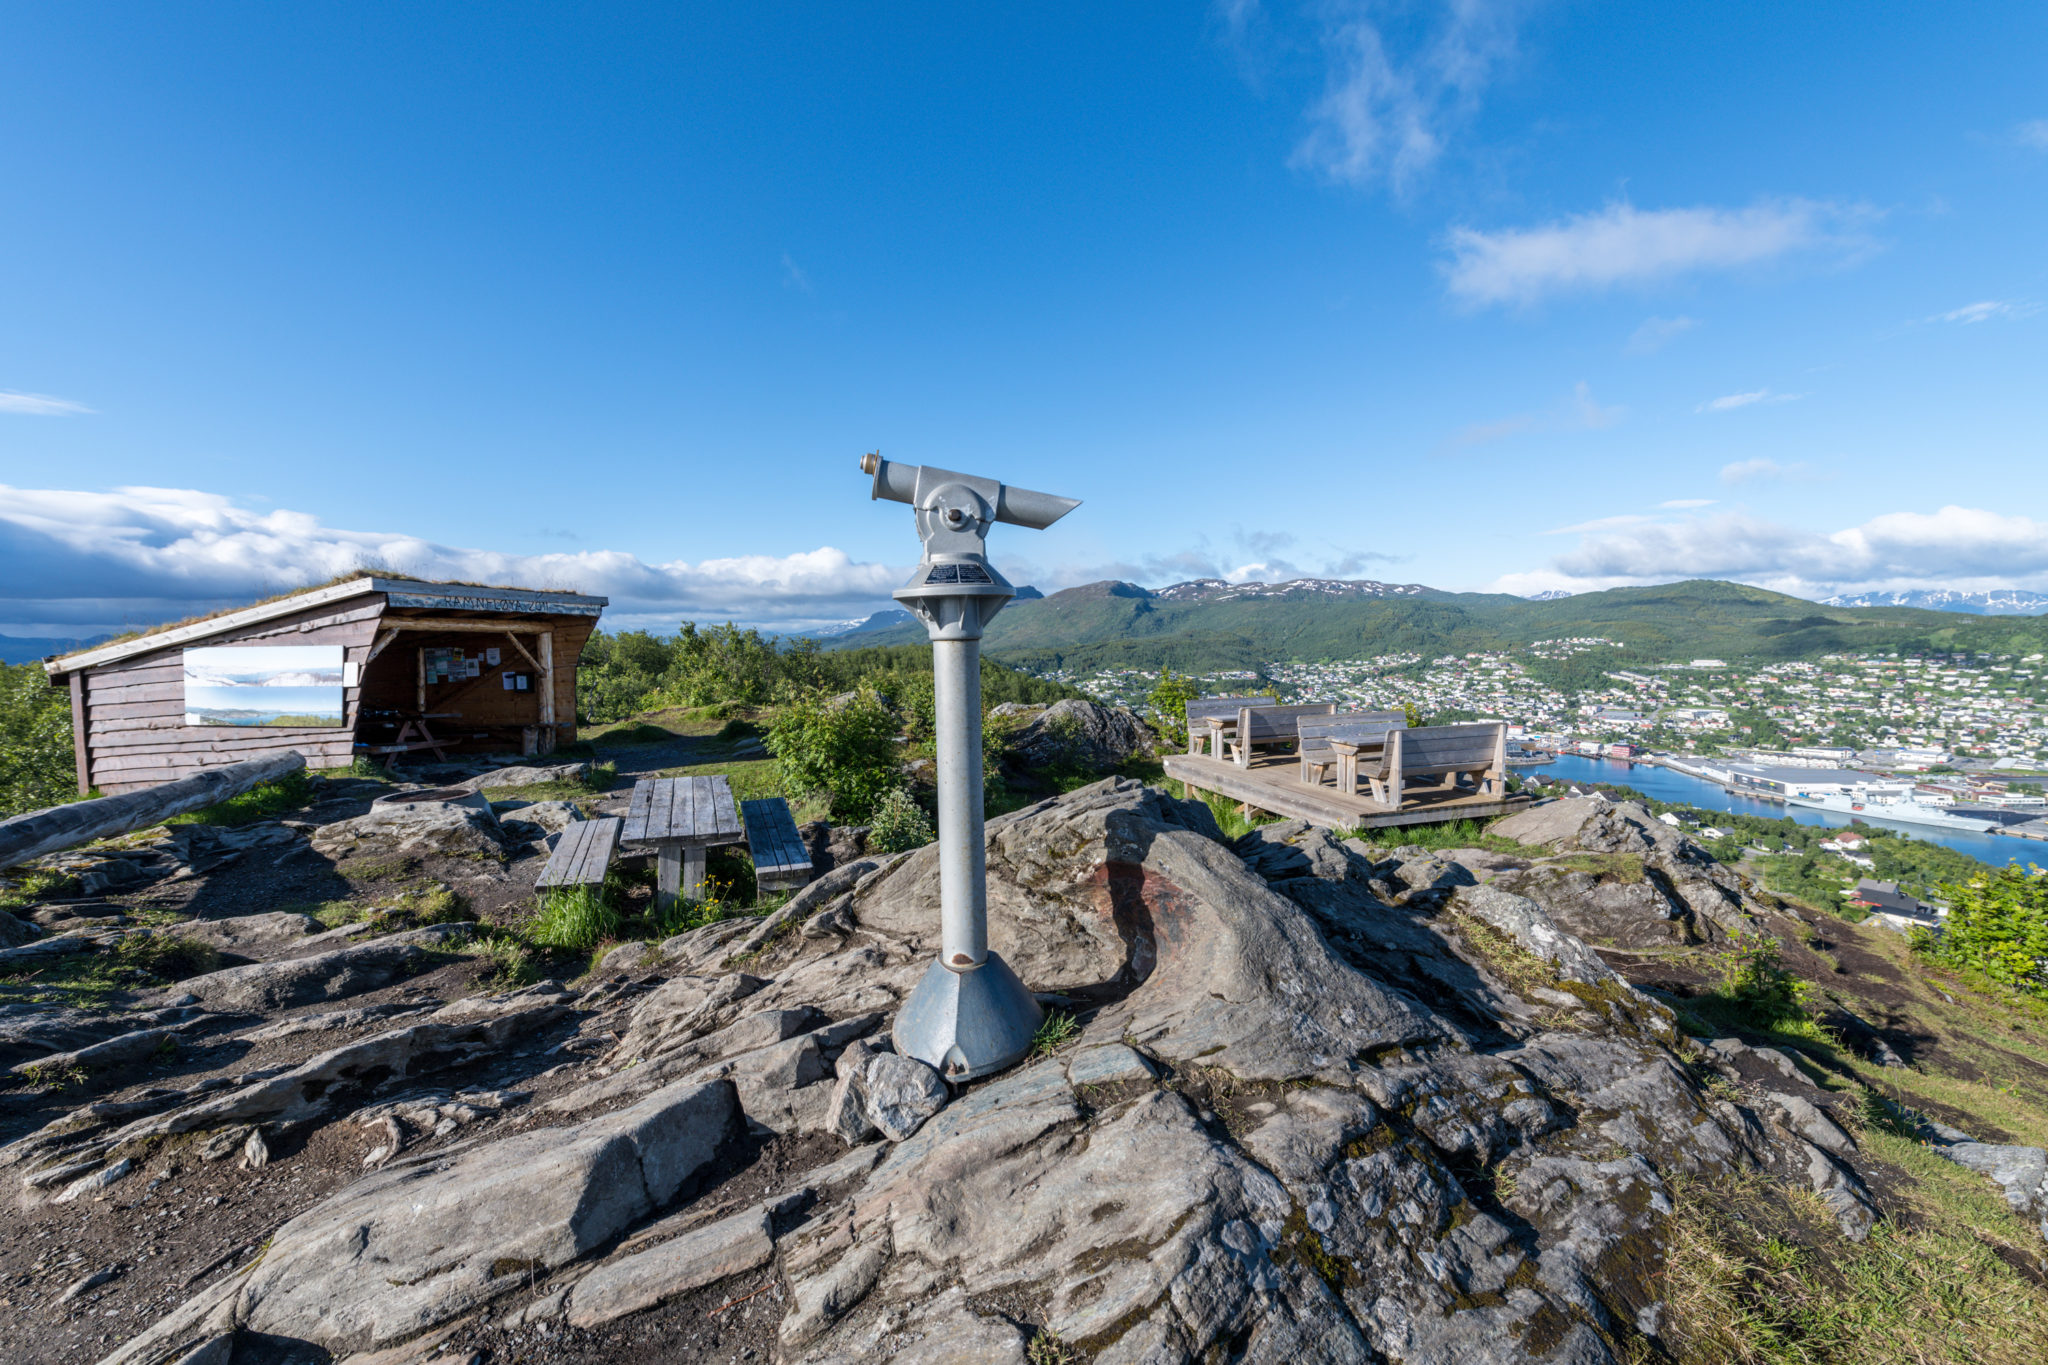 Gansåstoppen hill, an easy hike in the built-up area of Harstad © Dag Roland